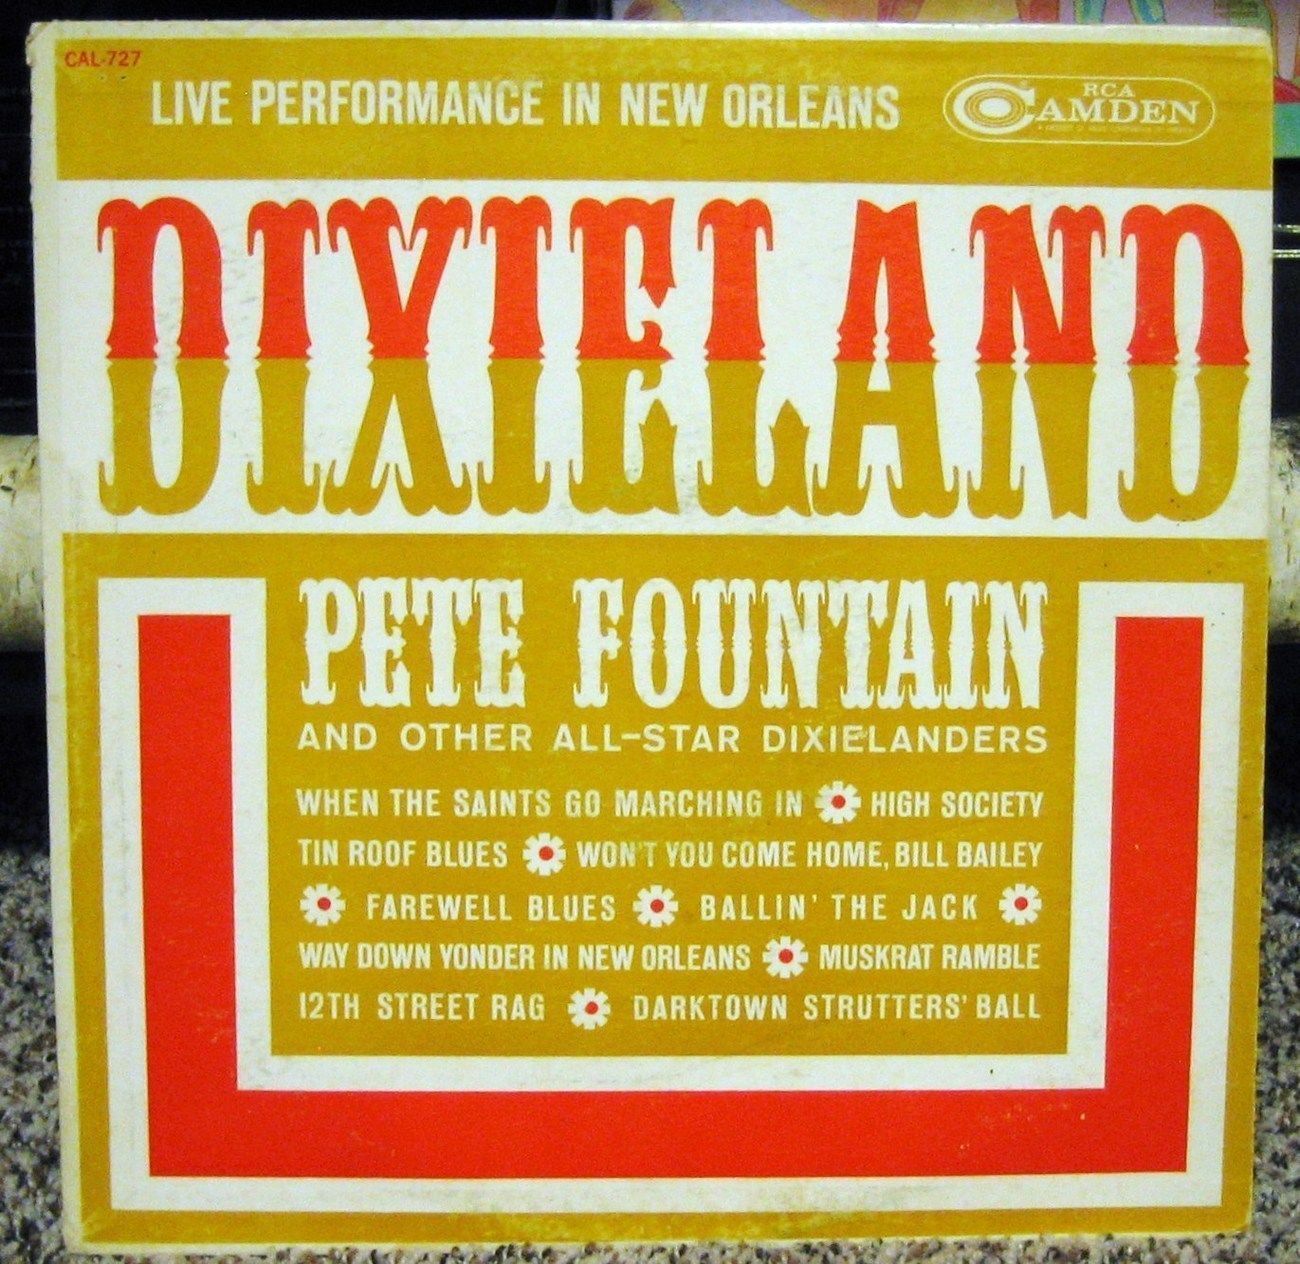 Primary image for Dixieland Pete Fountain All Star Live New Orleans LP Vinyl Record Album CAL 727